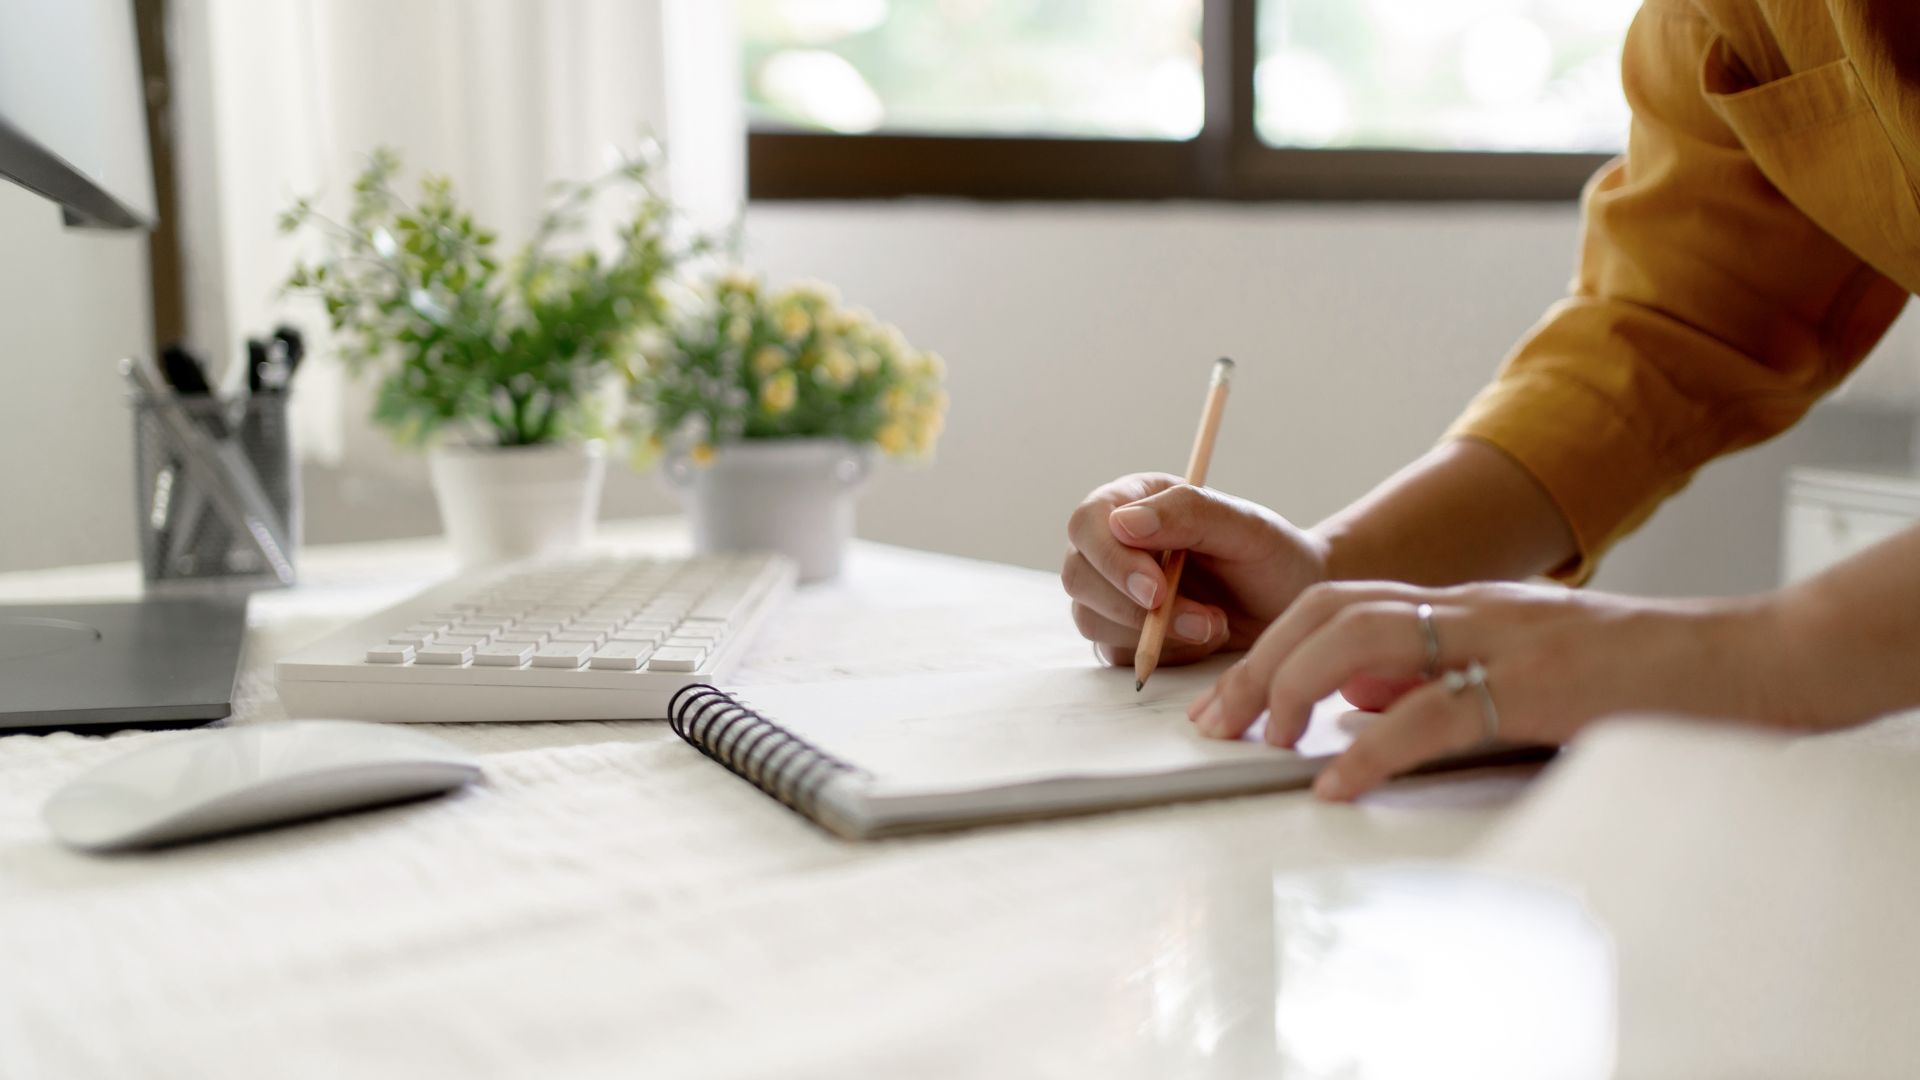 Woman writing in a notebook on clean, uncluttered desk.